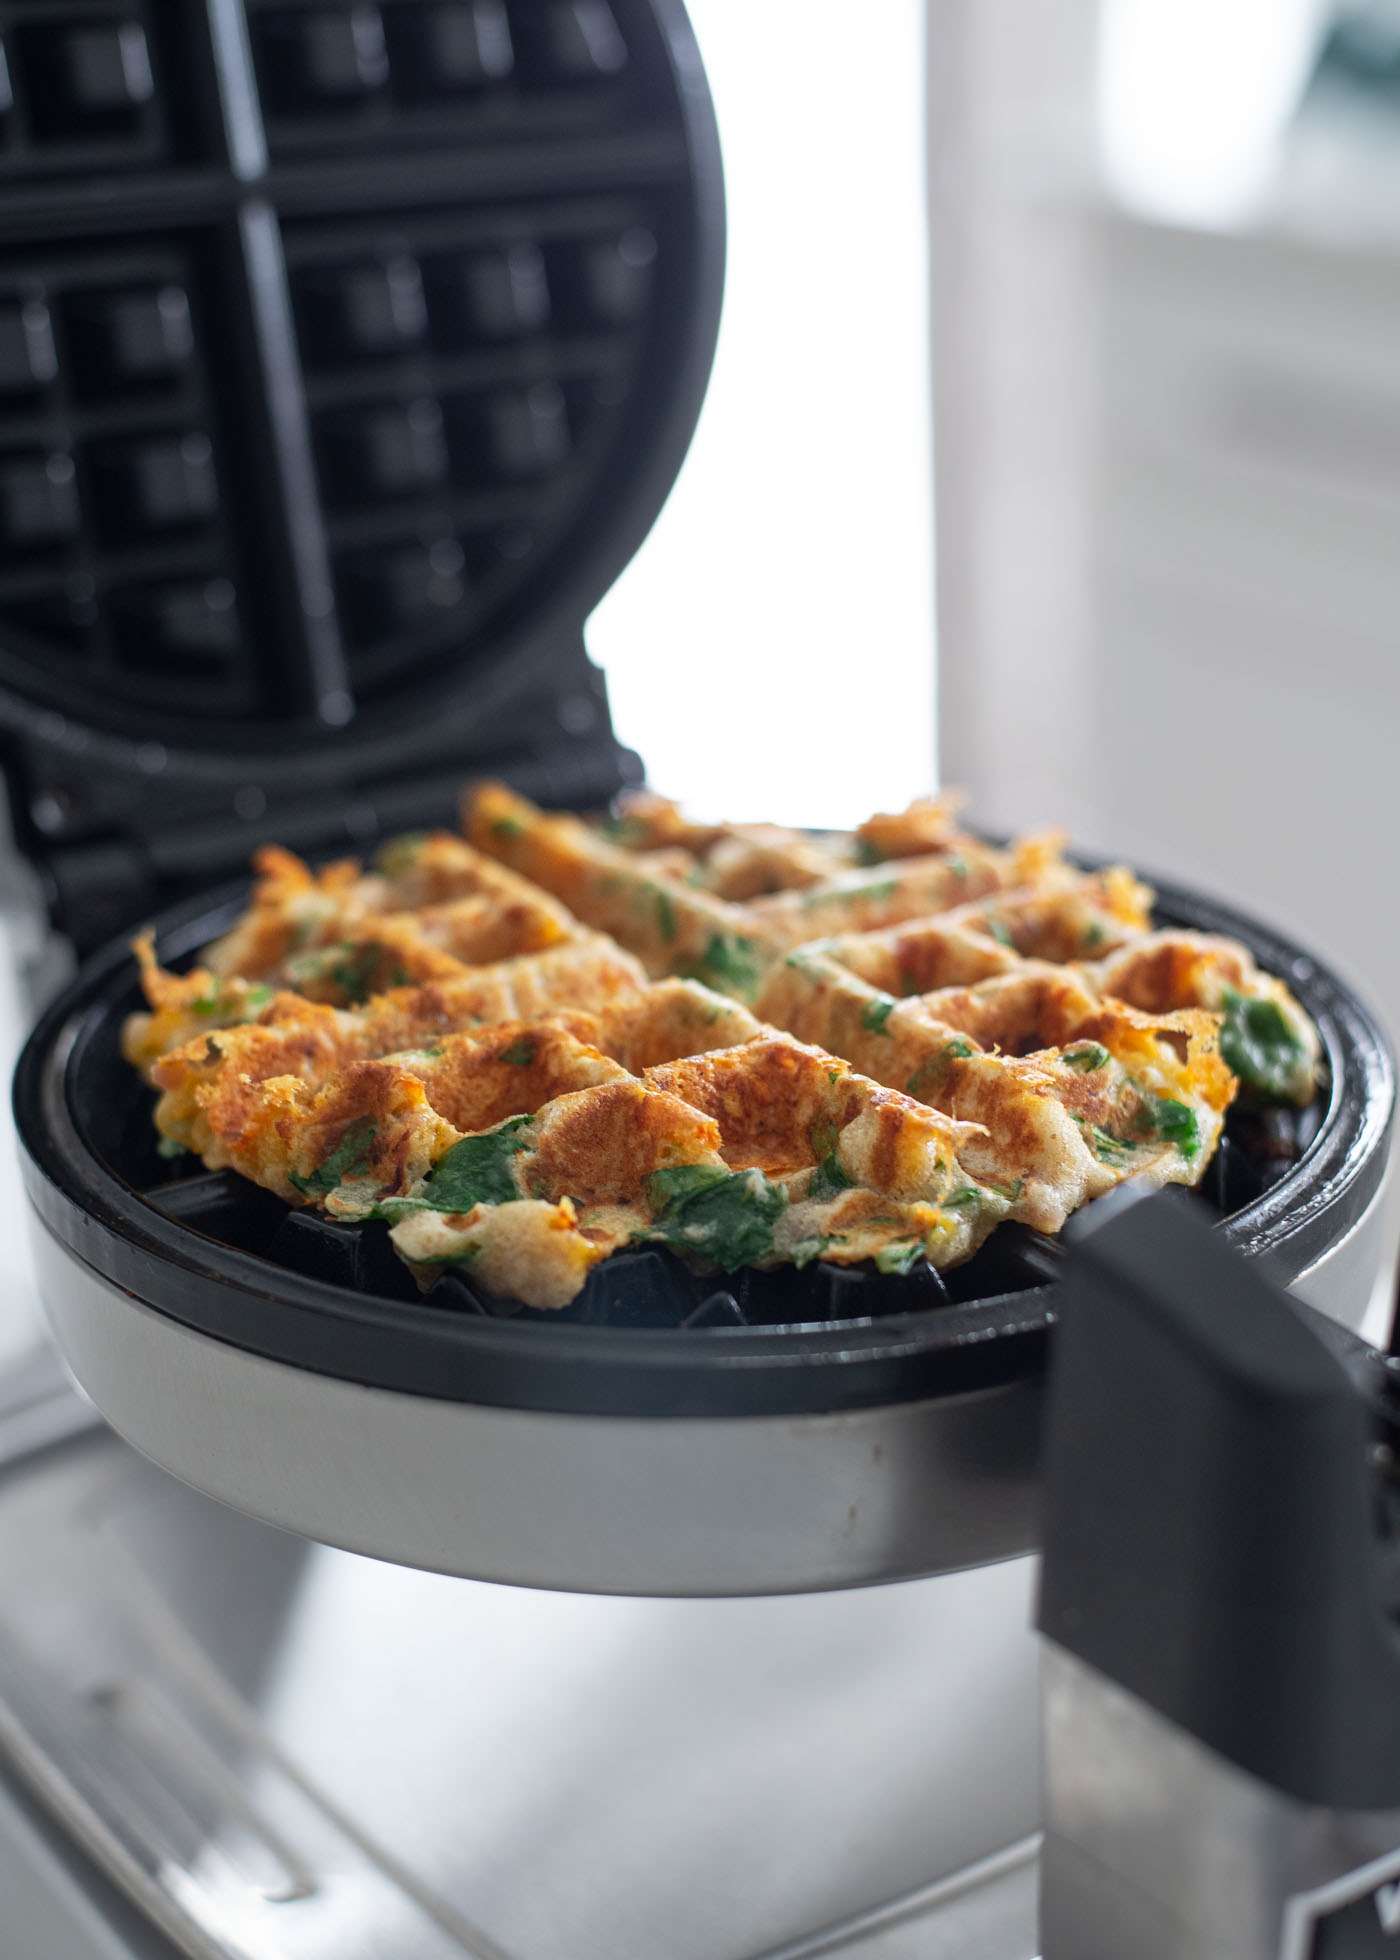 Savory waffles are finished cooking in a waffle maker to golden crisp.